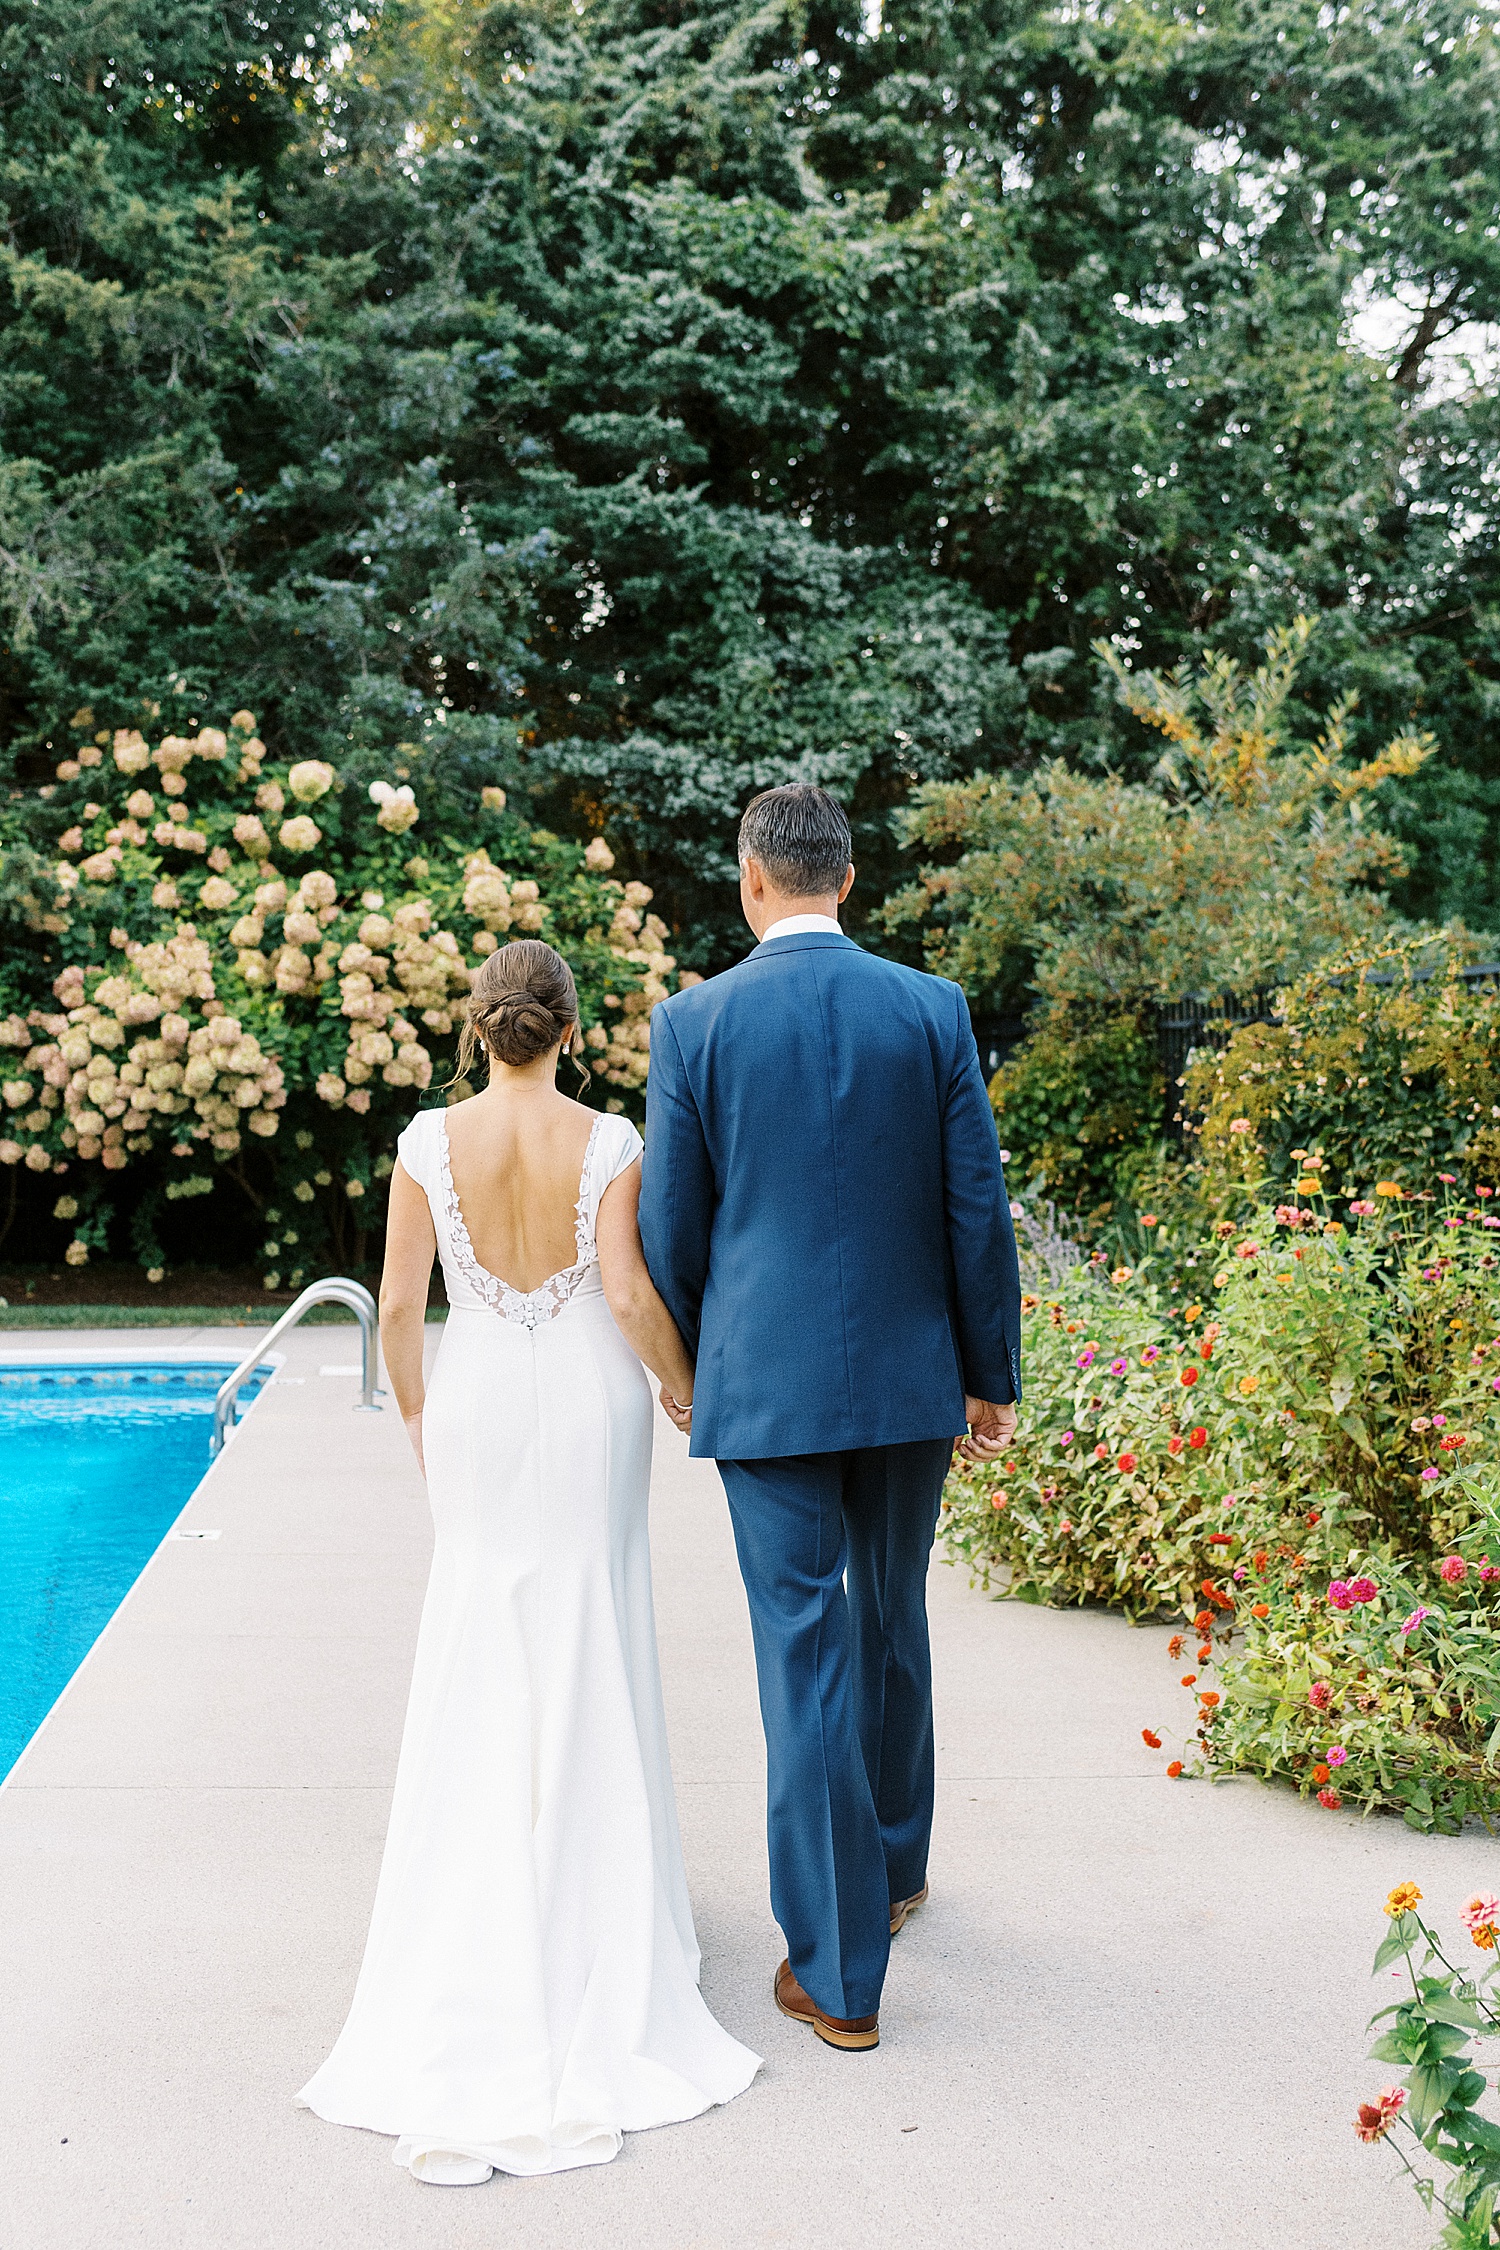 Bride and groom walking next to a pool by Cape Cod wedding photographer Lynne Reznick